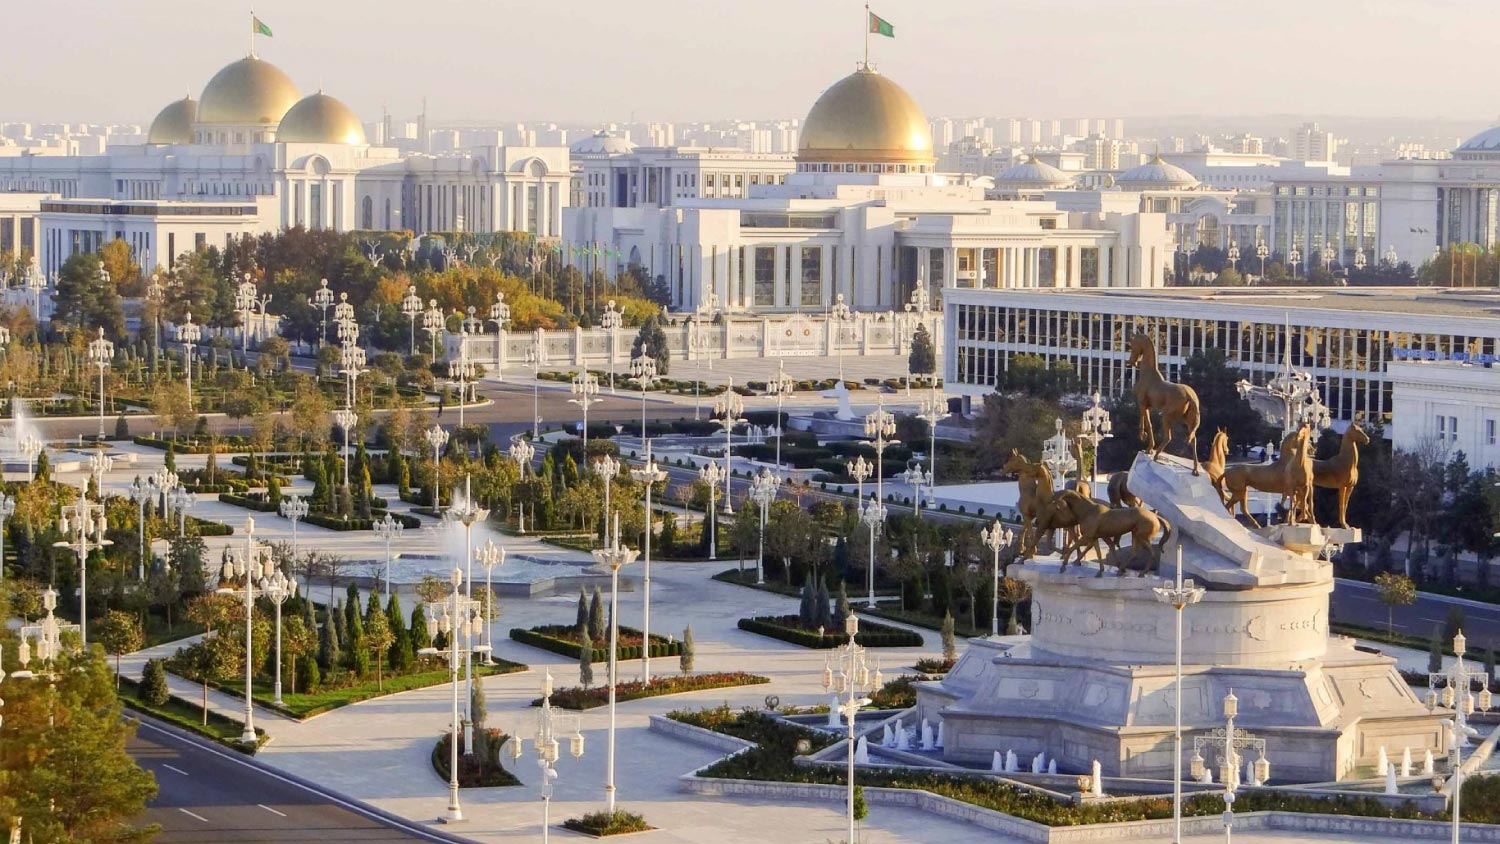 Capture the vibrant beauty of Ashgabat in Turkmenistan, a captivating stop on the journey to Australia spanning 21 countries, tailored for self-flying pilots. Immerse yourself in the stunning architecture, rich culture, and unique landscapes of this dynamic city in Central Asia.